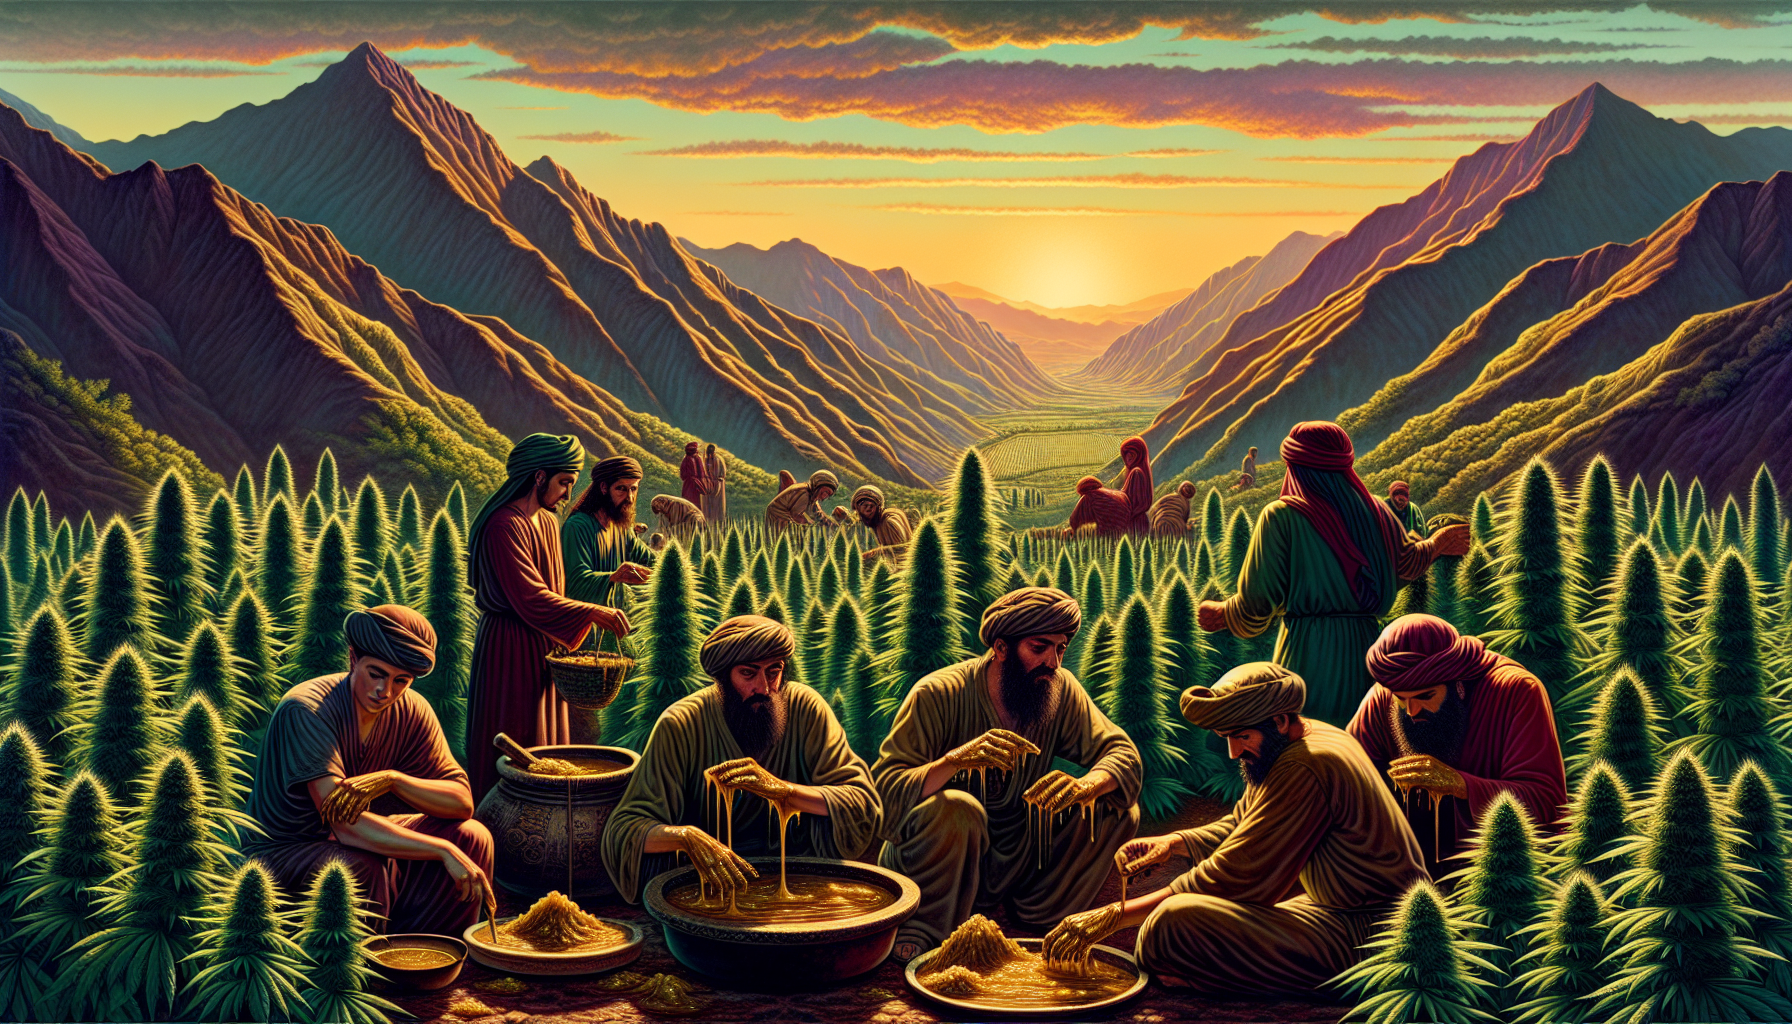 Illustration of ancient Persian and Central Asian landscapes with people collecting resin from cannabis plants